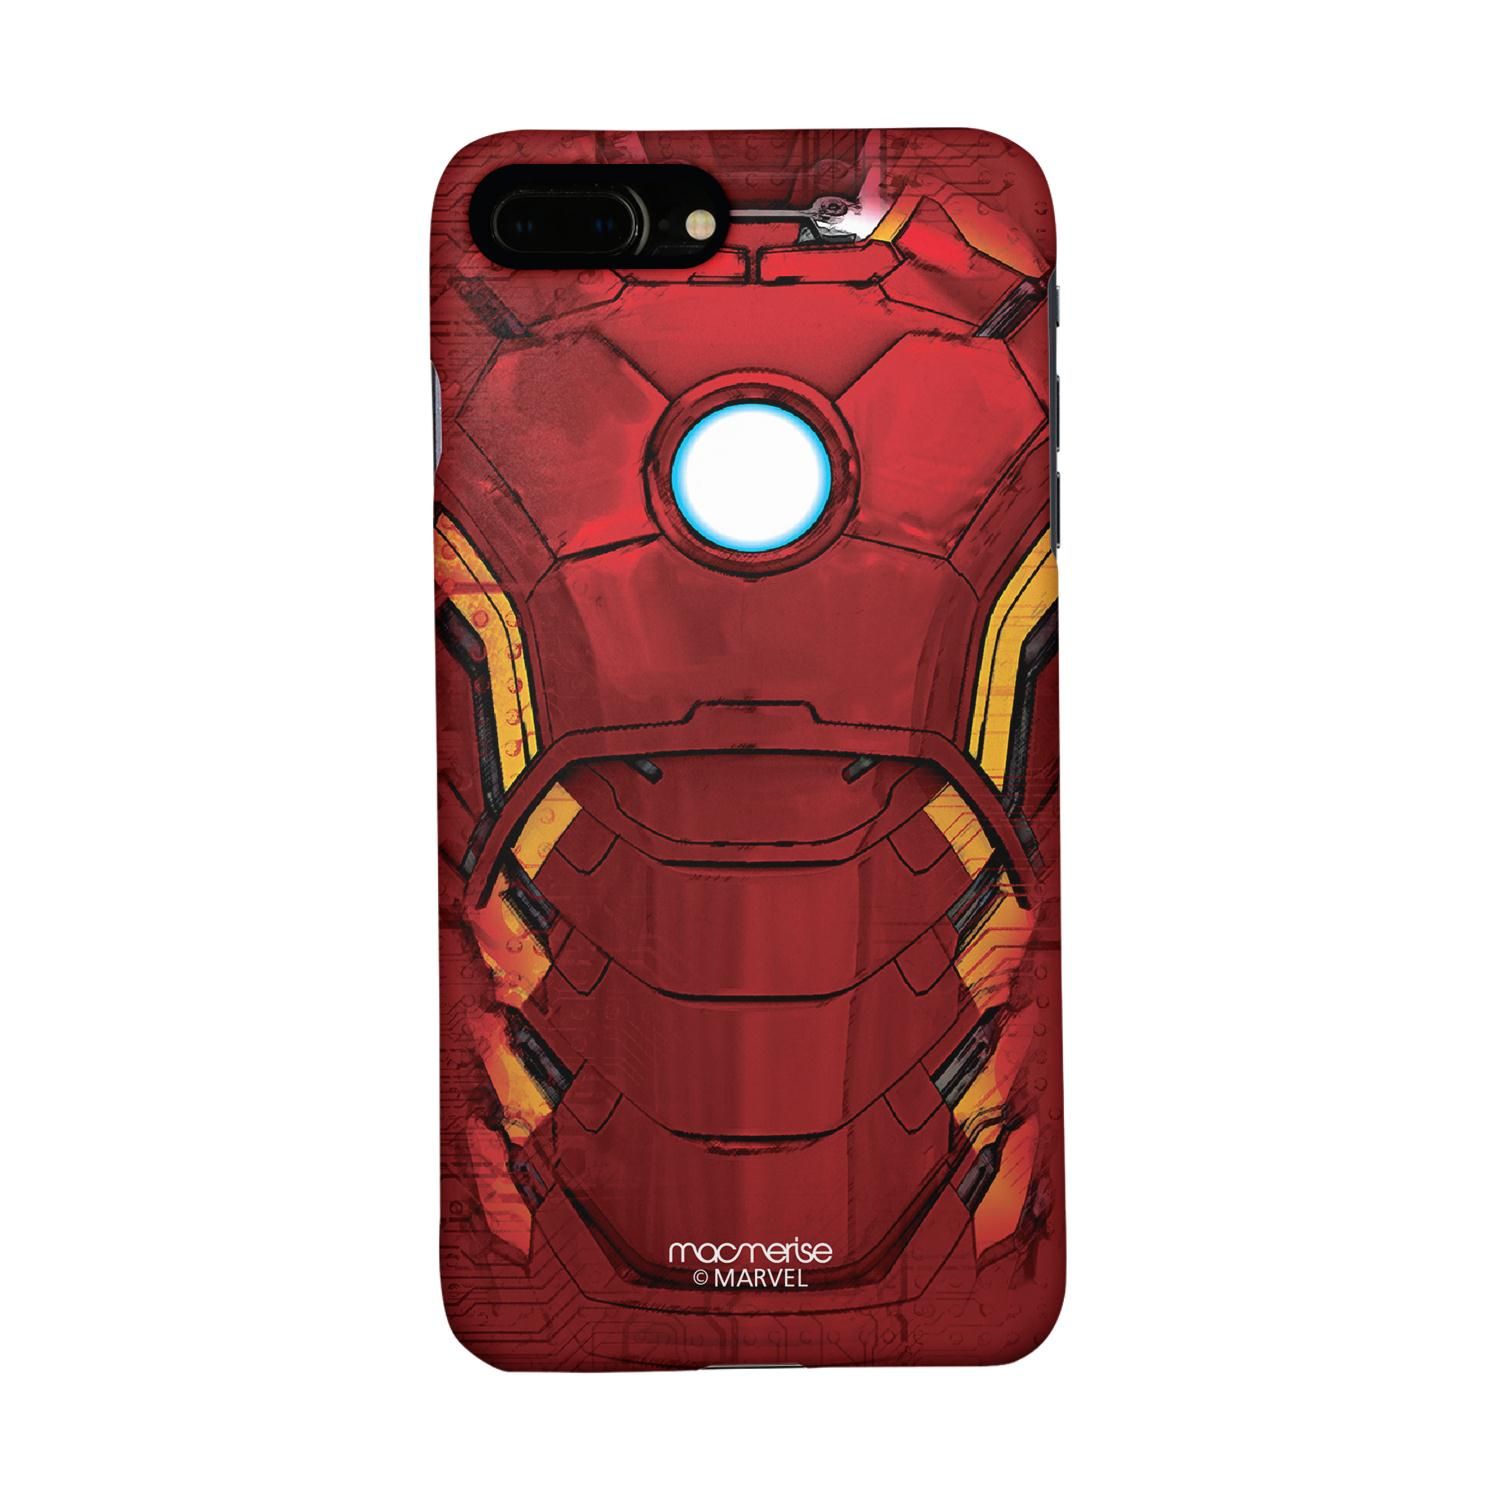 Buy Suit of Armour - Sleek Phone Case for iPhone 7 Plus Online